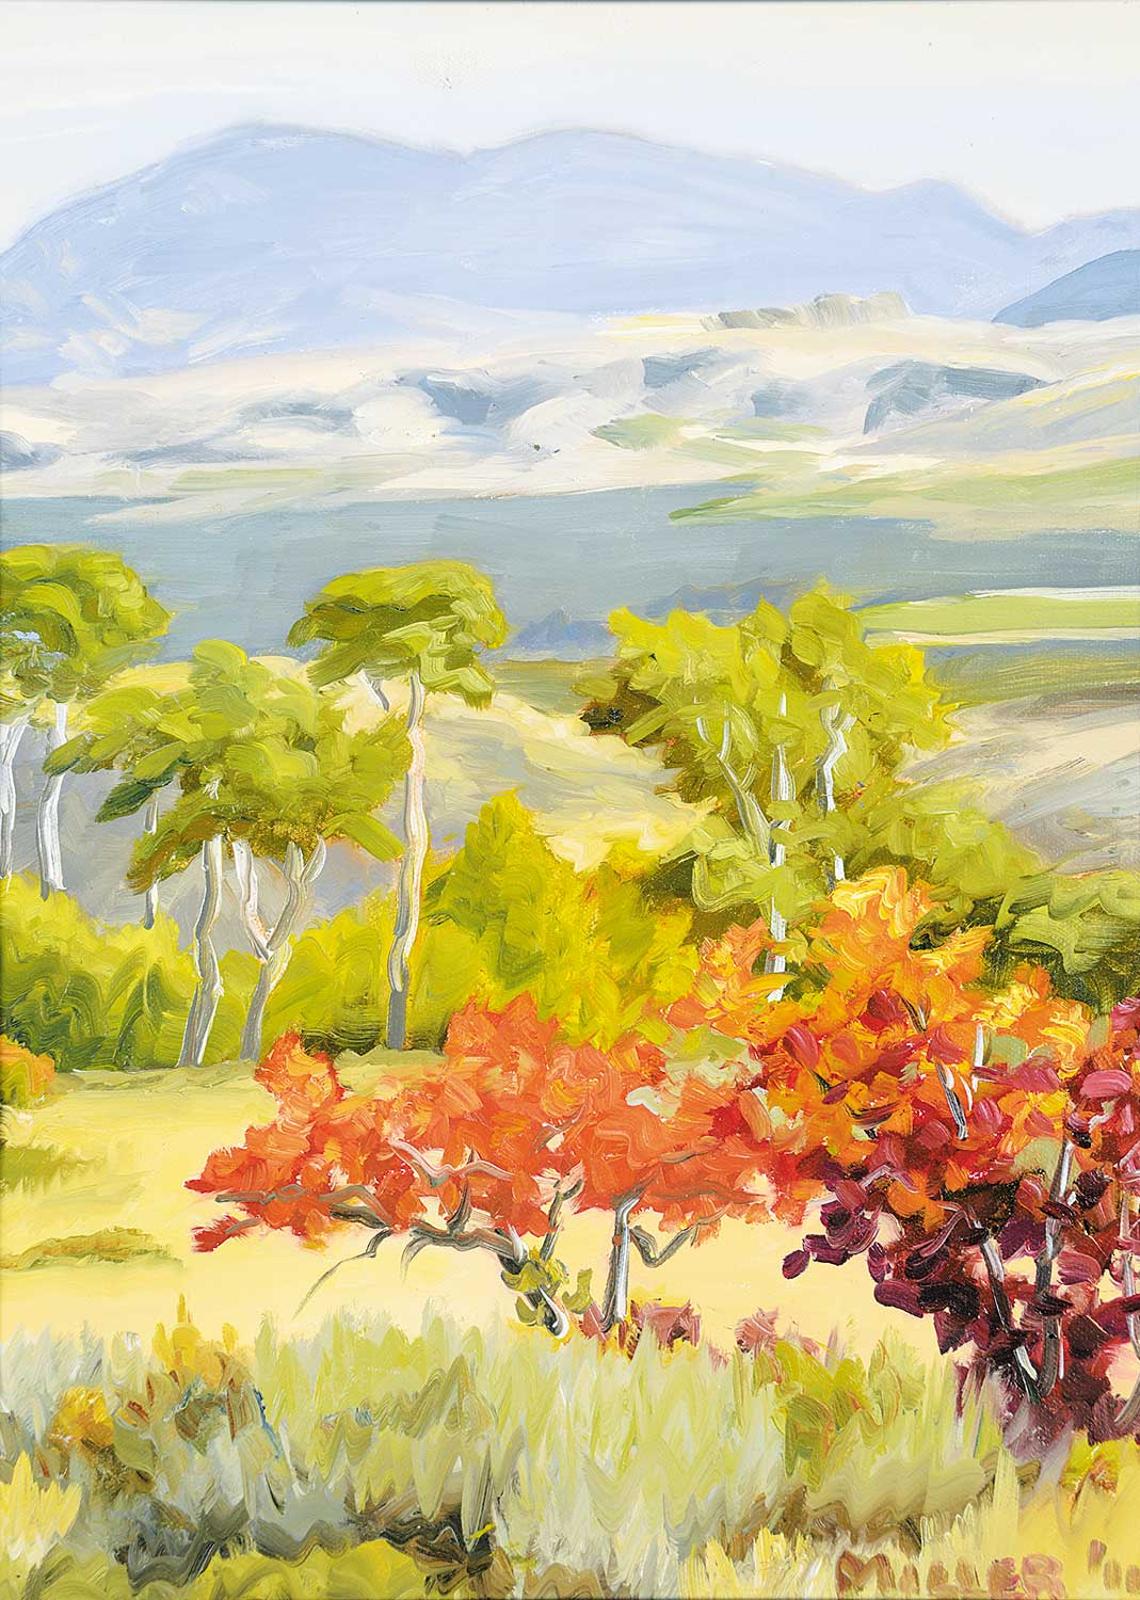 Doug Miller - Untitled - Colour in the Foothills